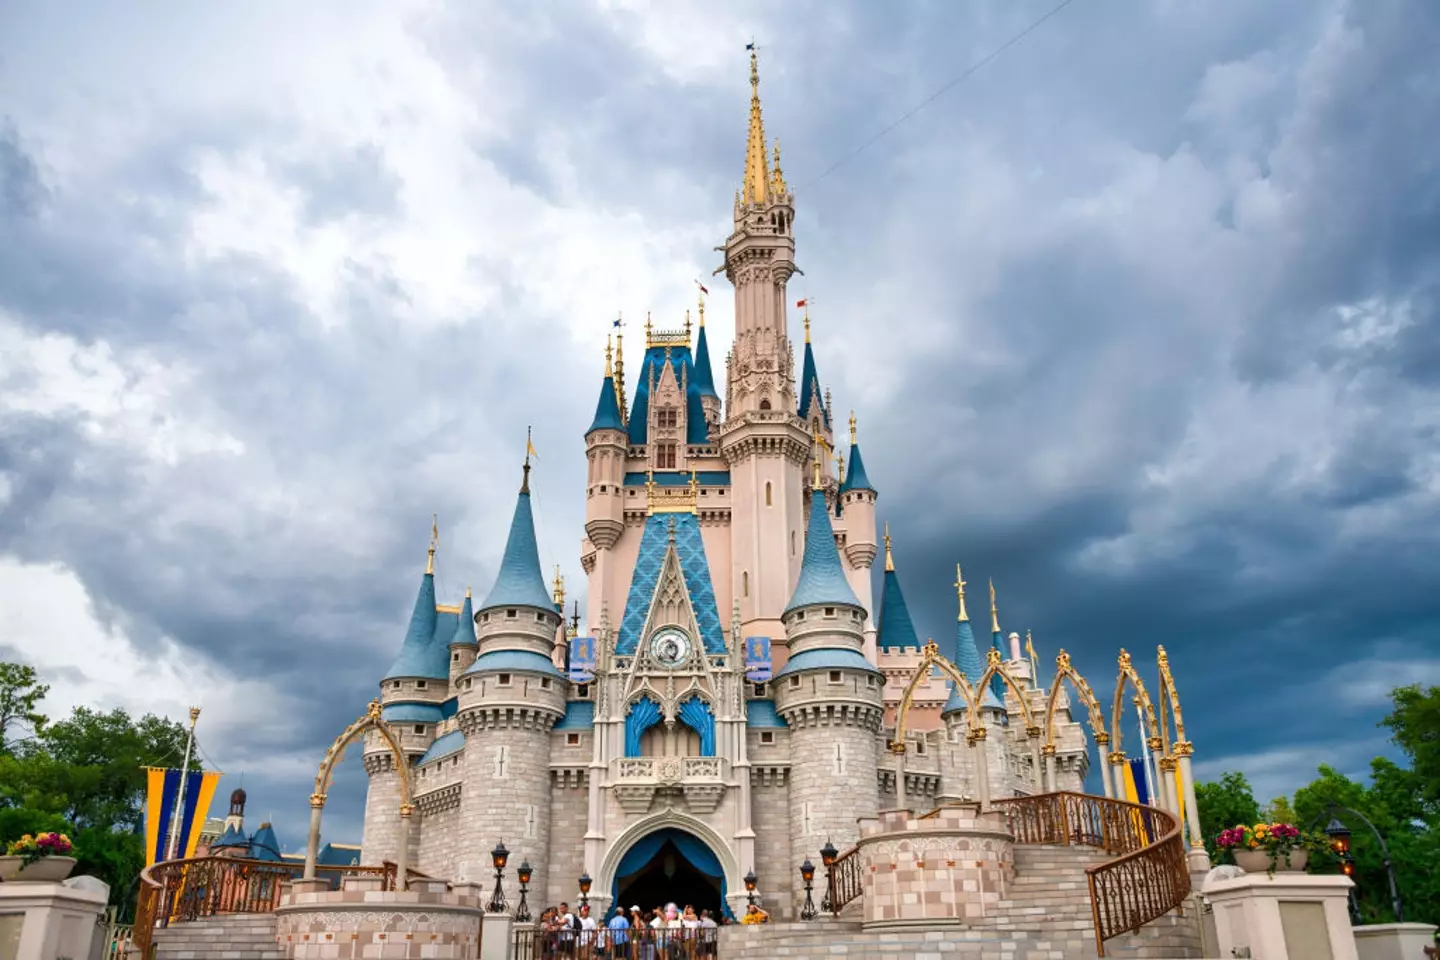 The doctor's husband alleges multiple counts of negligence against Disney Parks and Resorts, and the restaurant where they were eating.